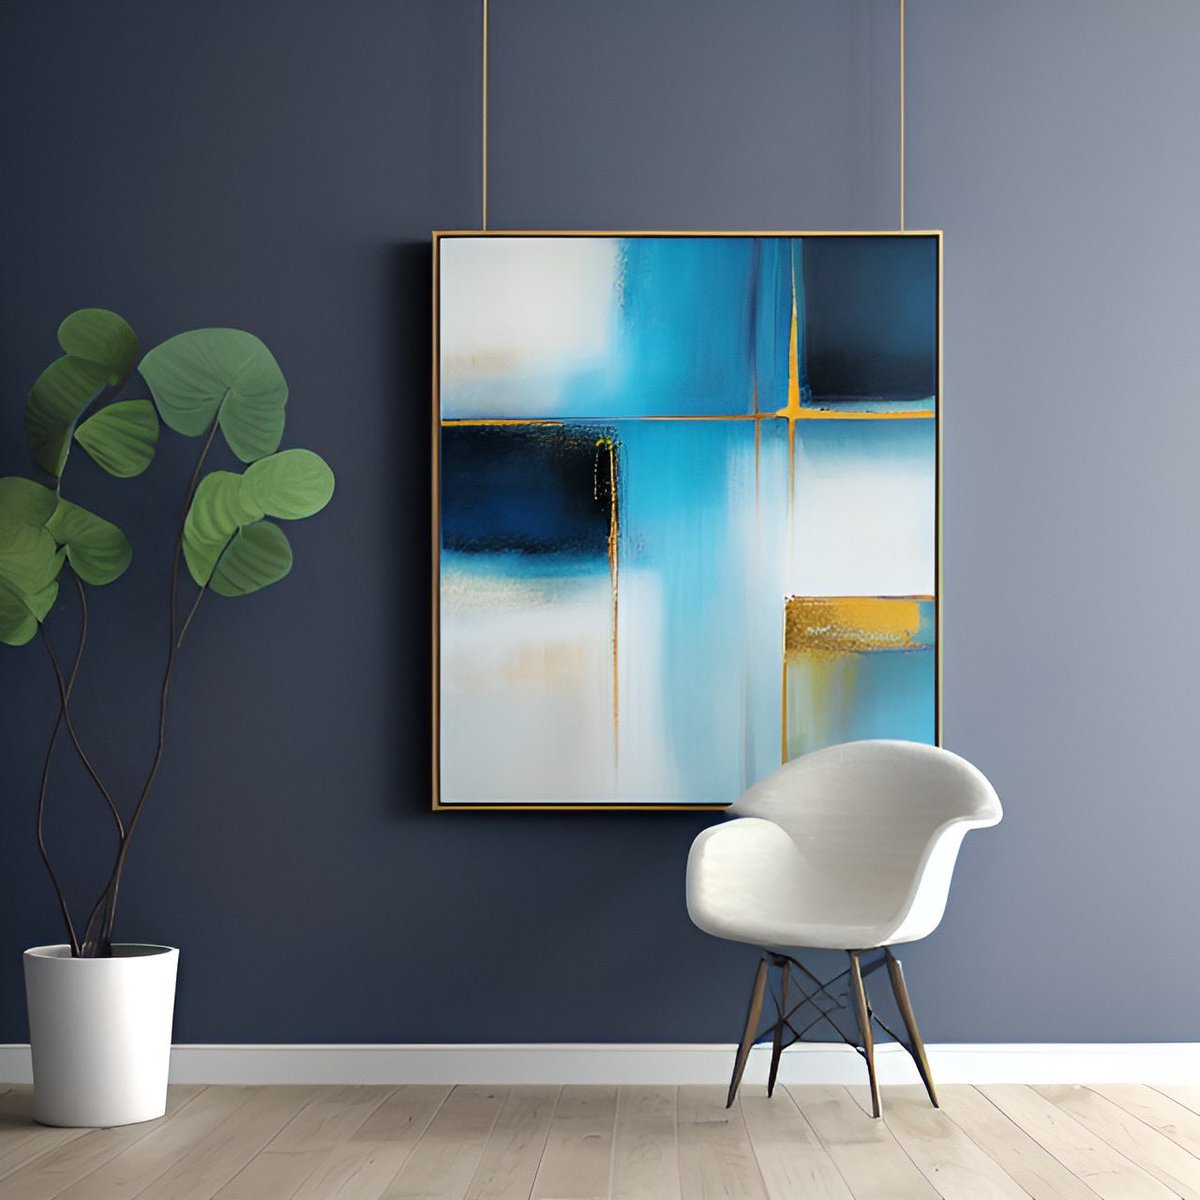 GM! Soothing palette for home or office, don’t you agree? 💙🕊️

#fineart #painting #Leilapinto #contemporaryart #blueandwhitedecor #vacationhome #coastaldecor #artfulinteriors